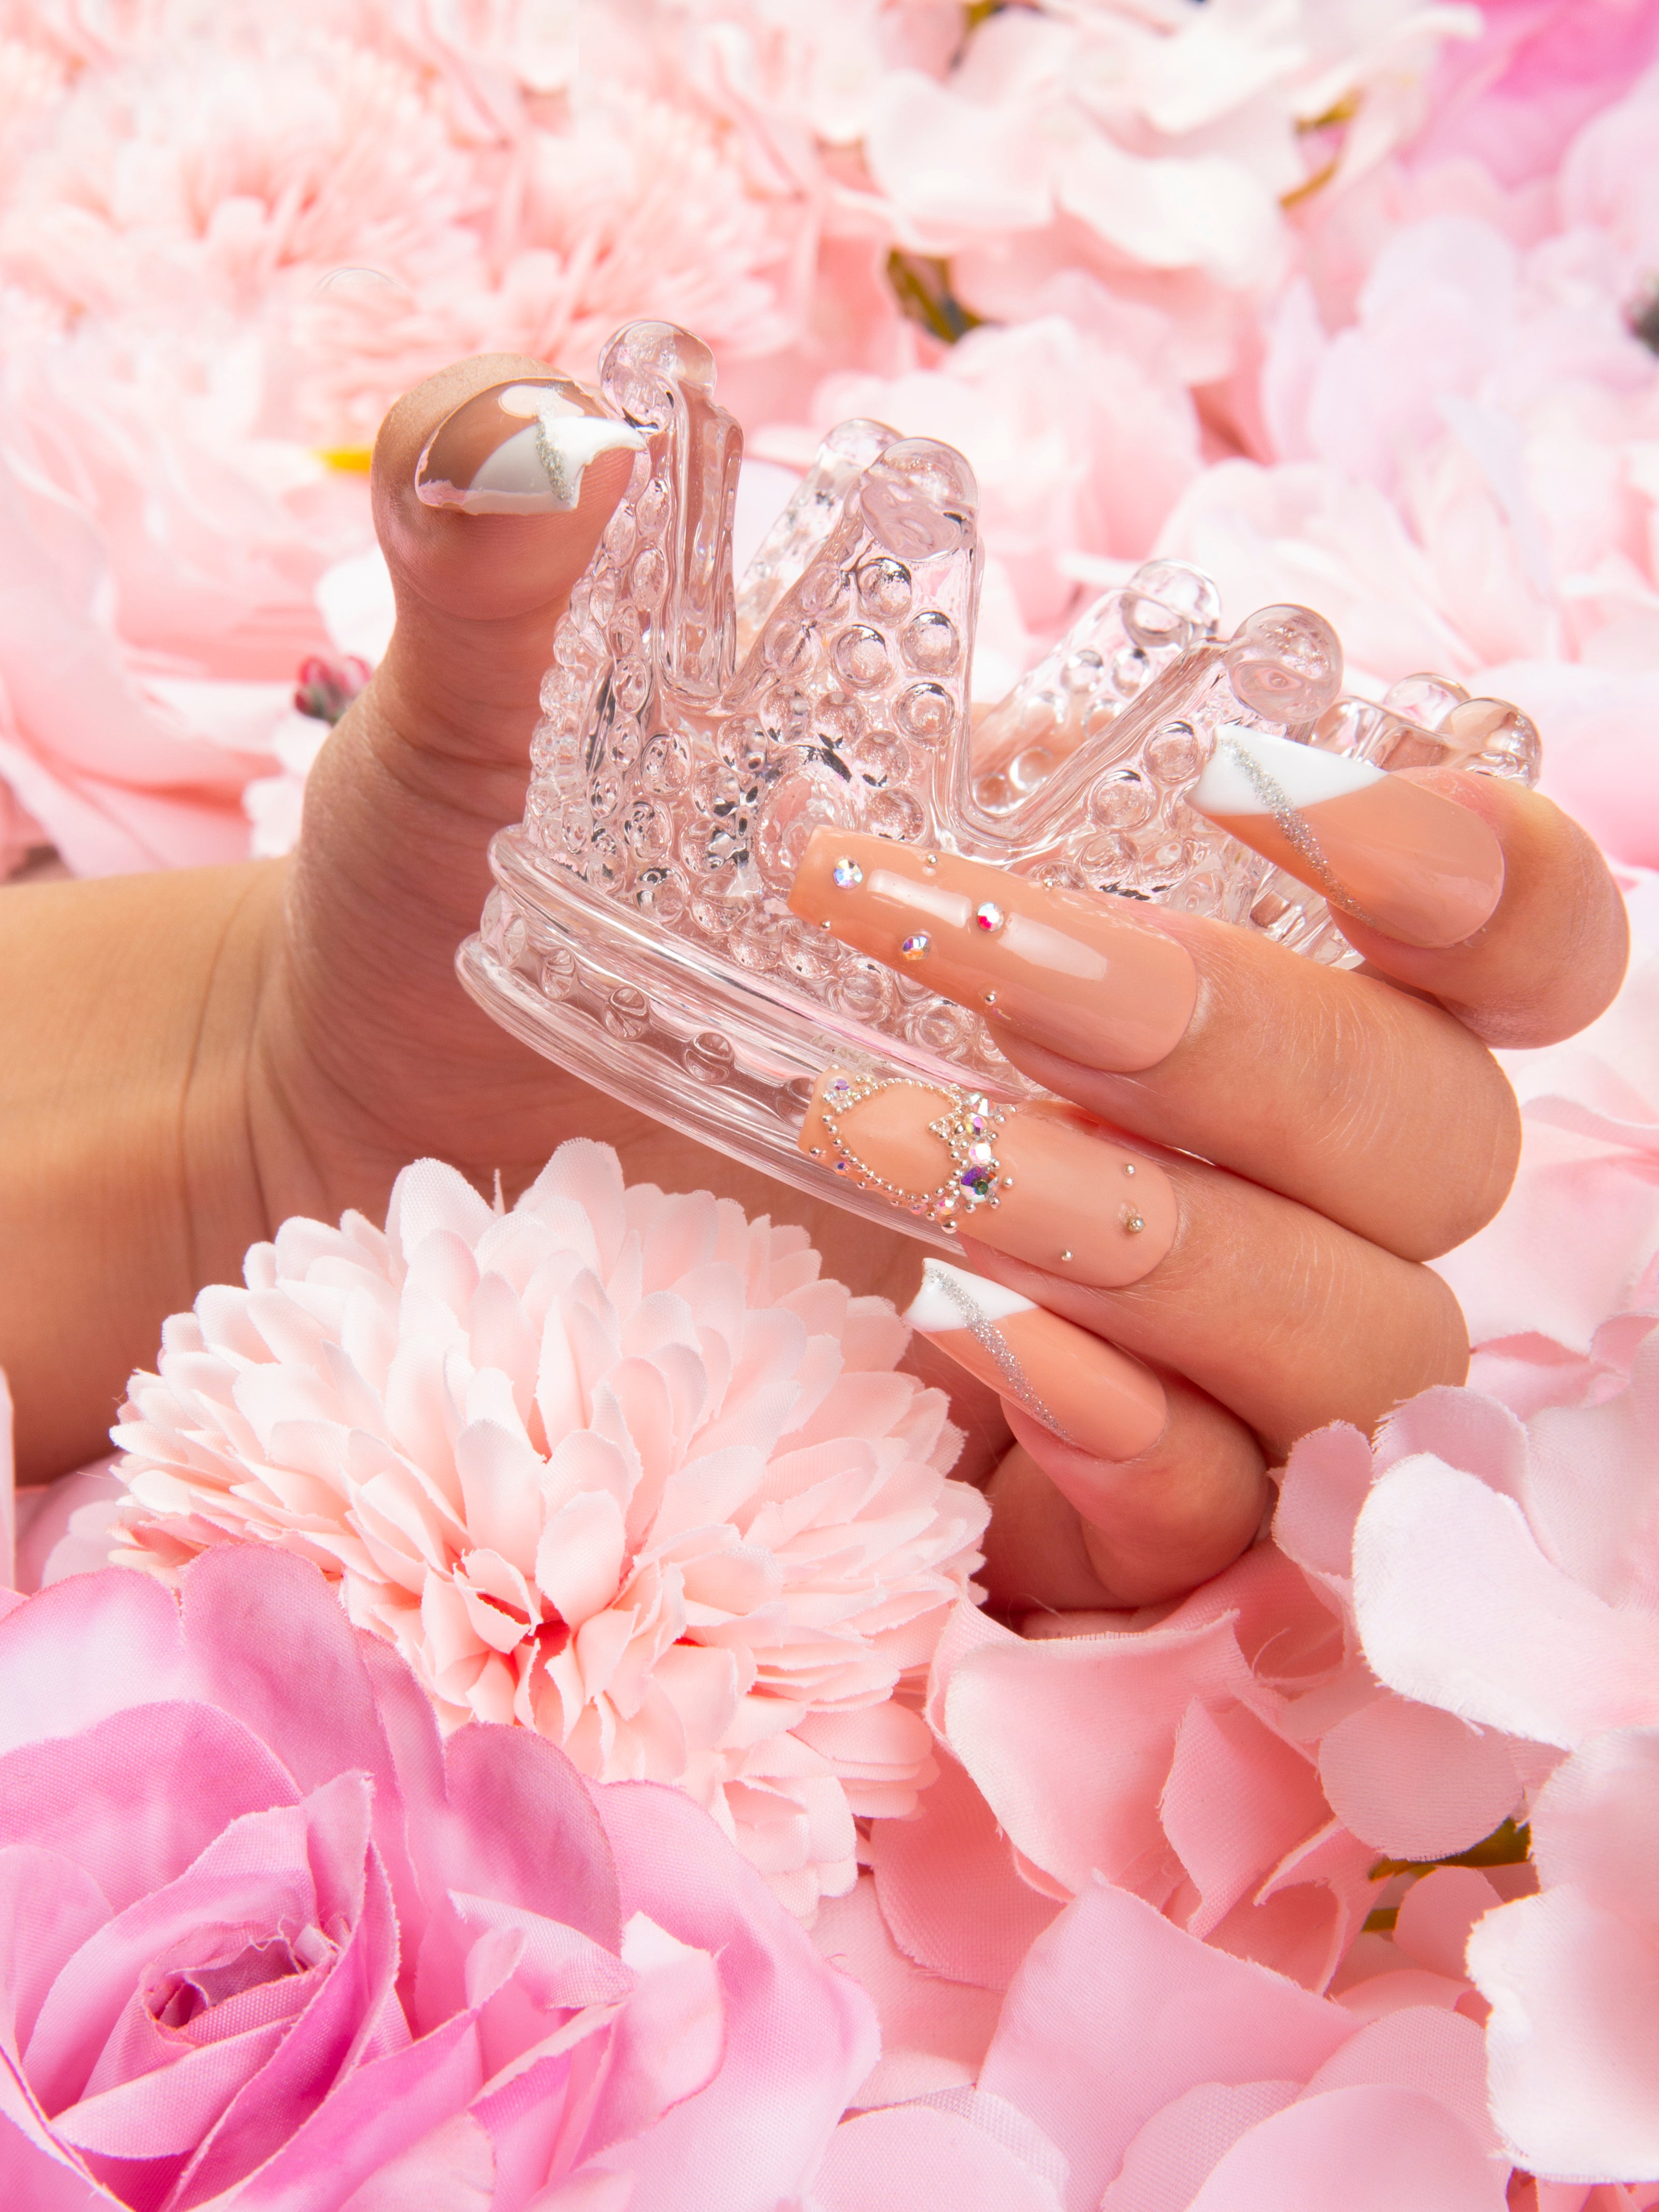 Hand with Lovely Kitten Heels press-on nails holding a clear plastic crown on a bed of pink flowers. Nails have a classic French tip design with glitter and white base, square-shaped.